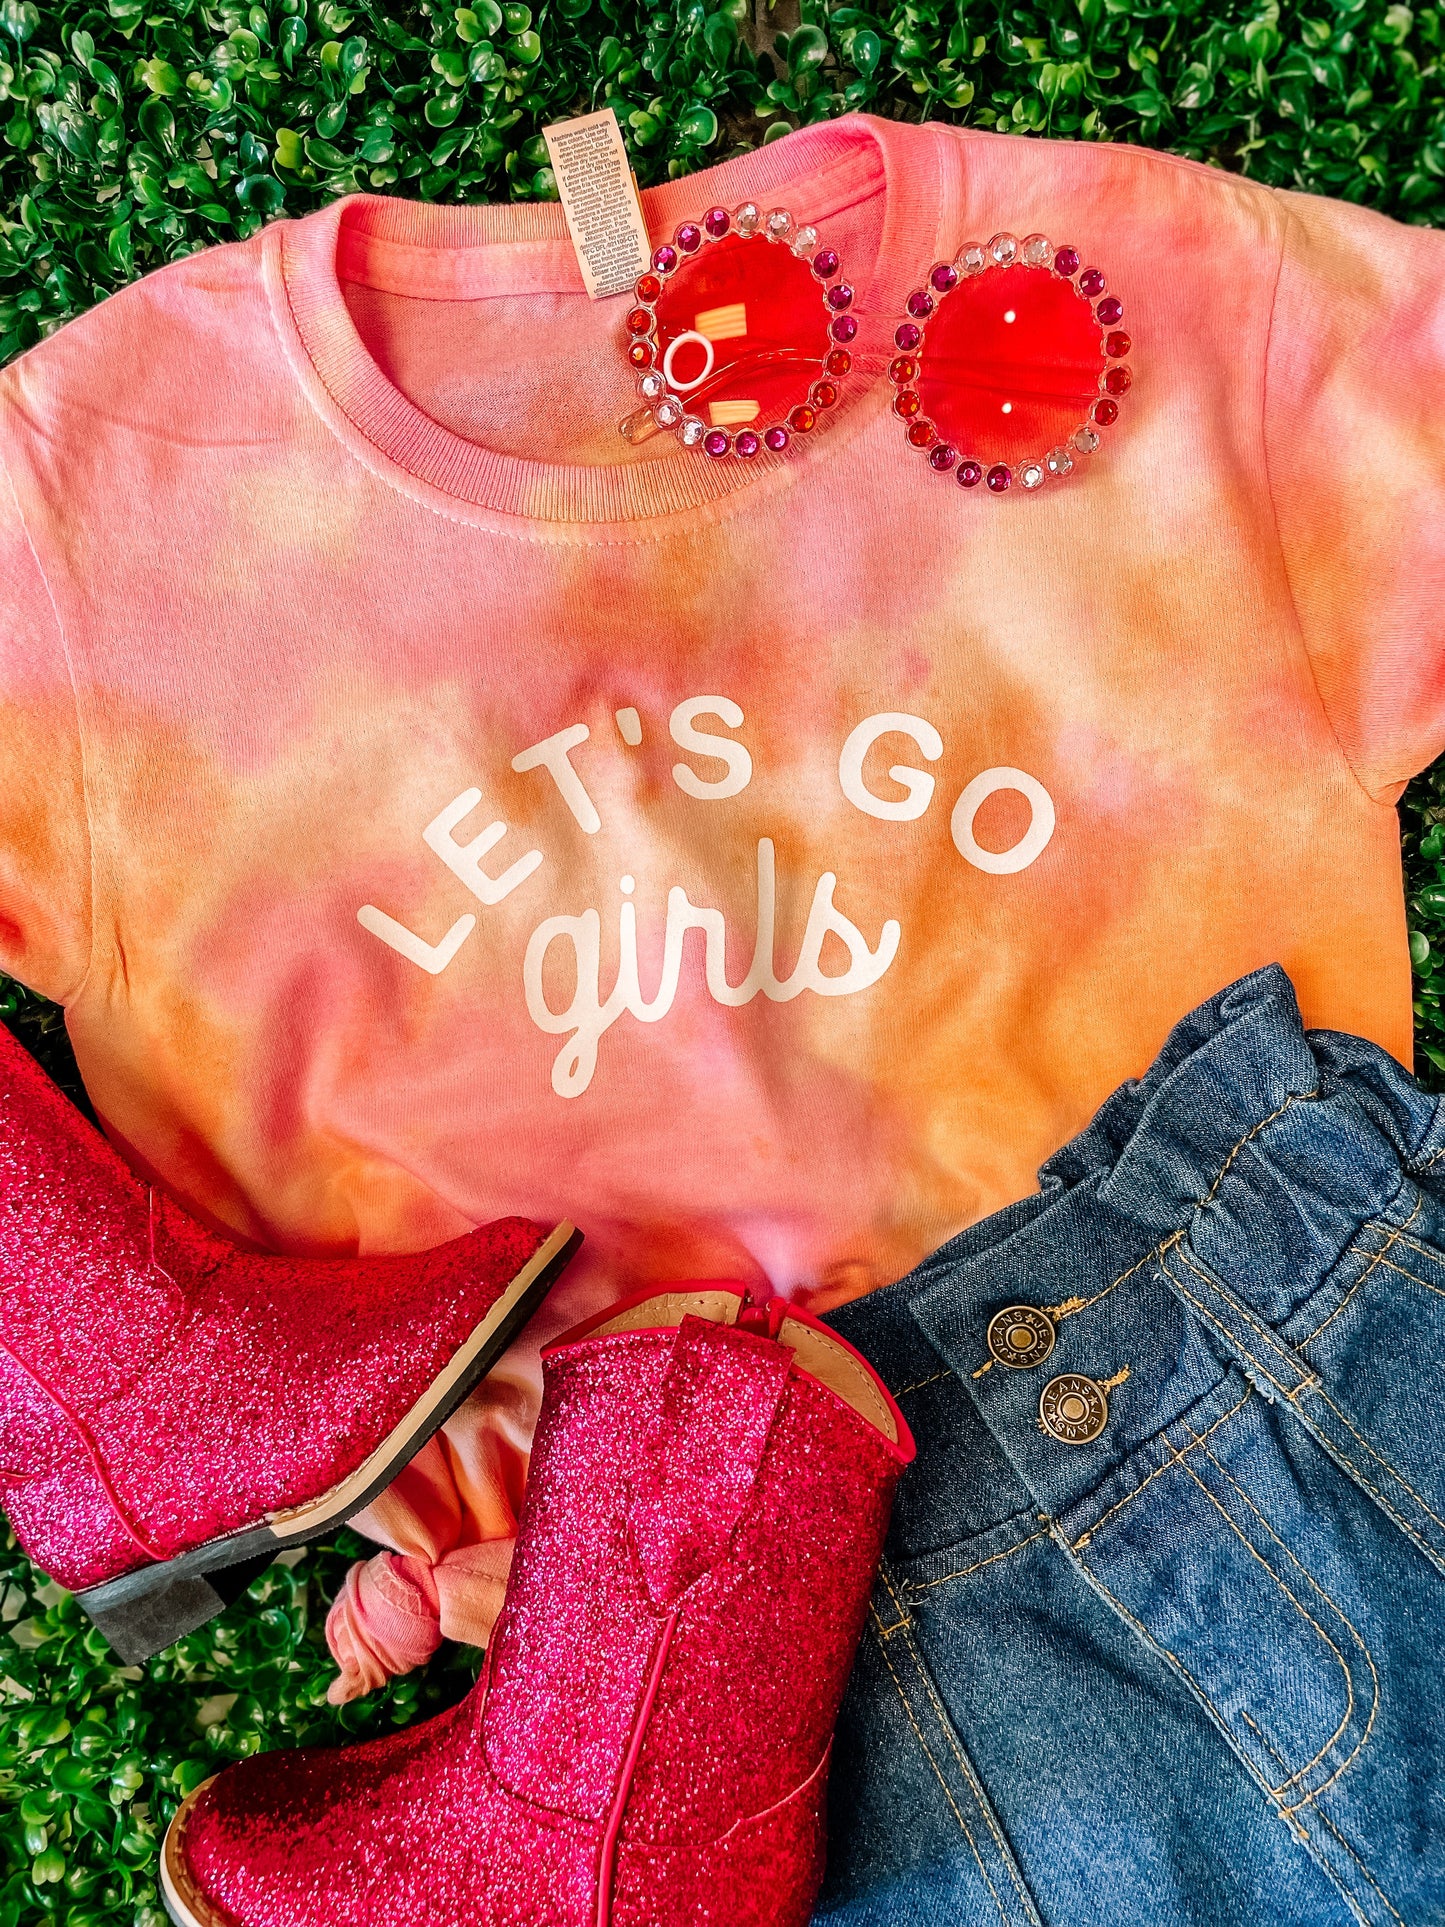 Let's Go, Girls | Cotton Candy Tie Dye Tee